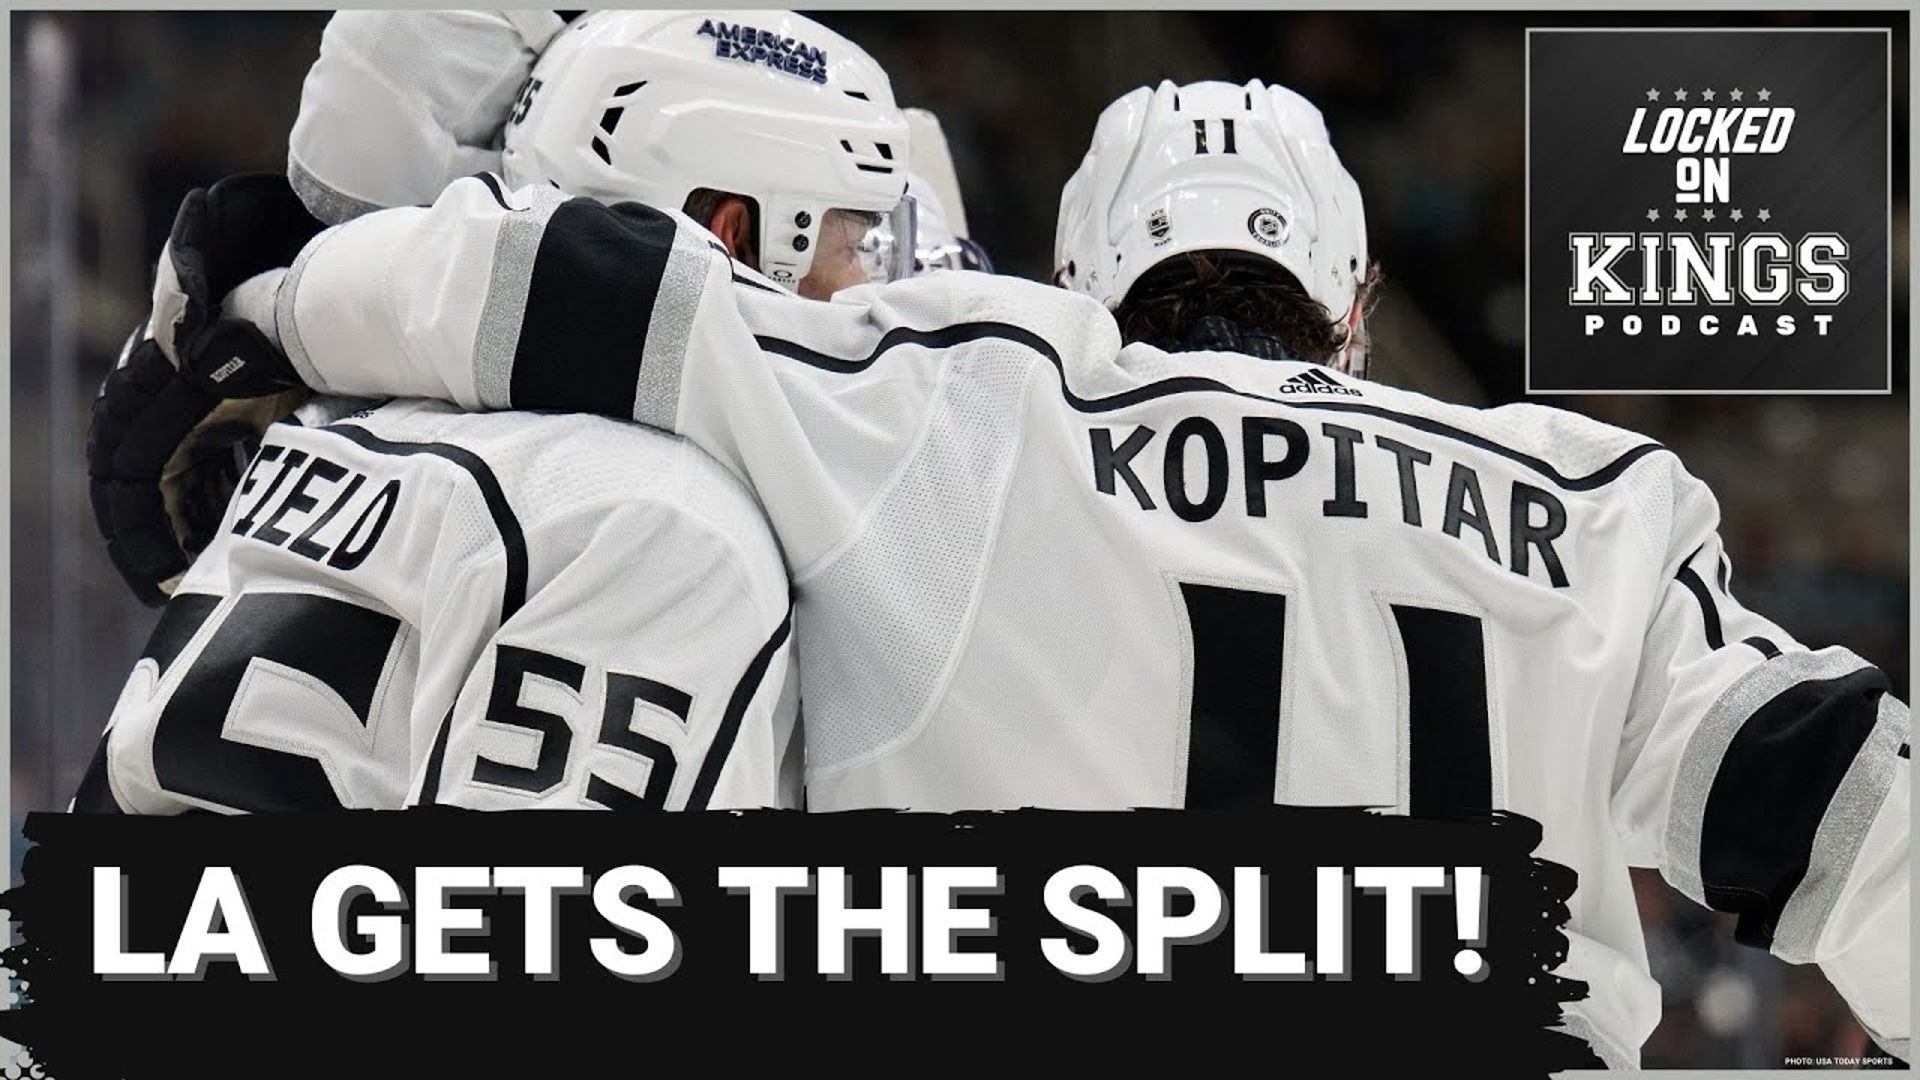 The Captain Anze Kopitar comes though in the clutch with the Game 2 OT game winner, the Kings get the split in Edmonton headed back to home